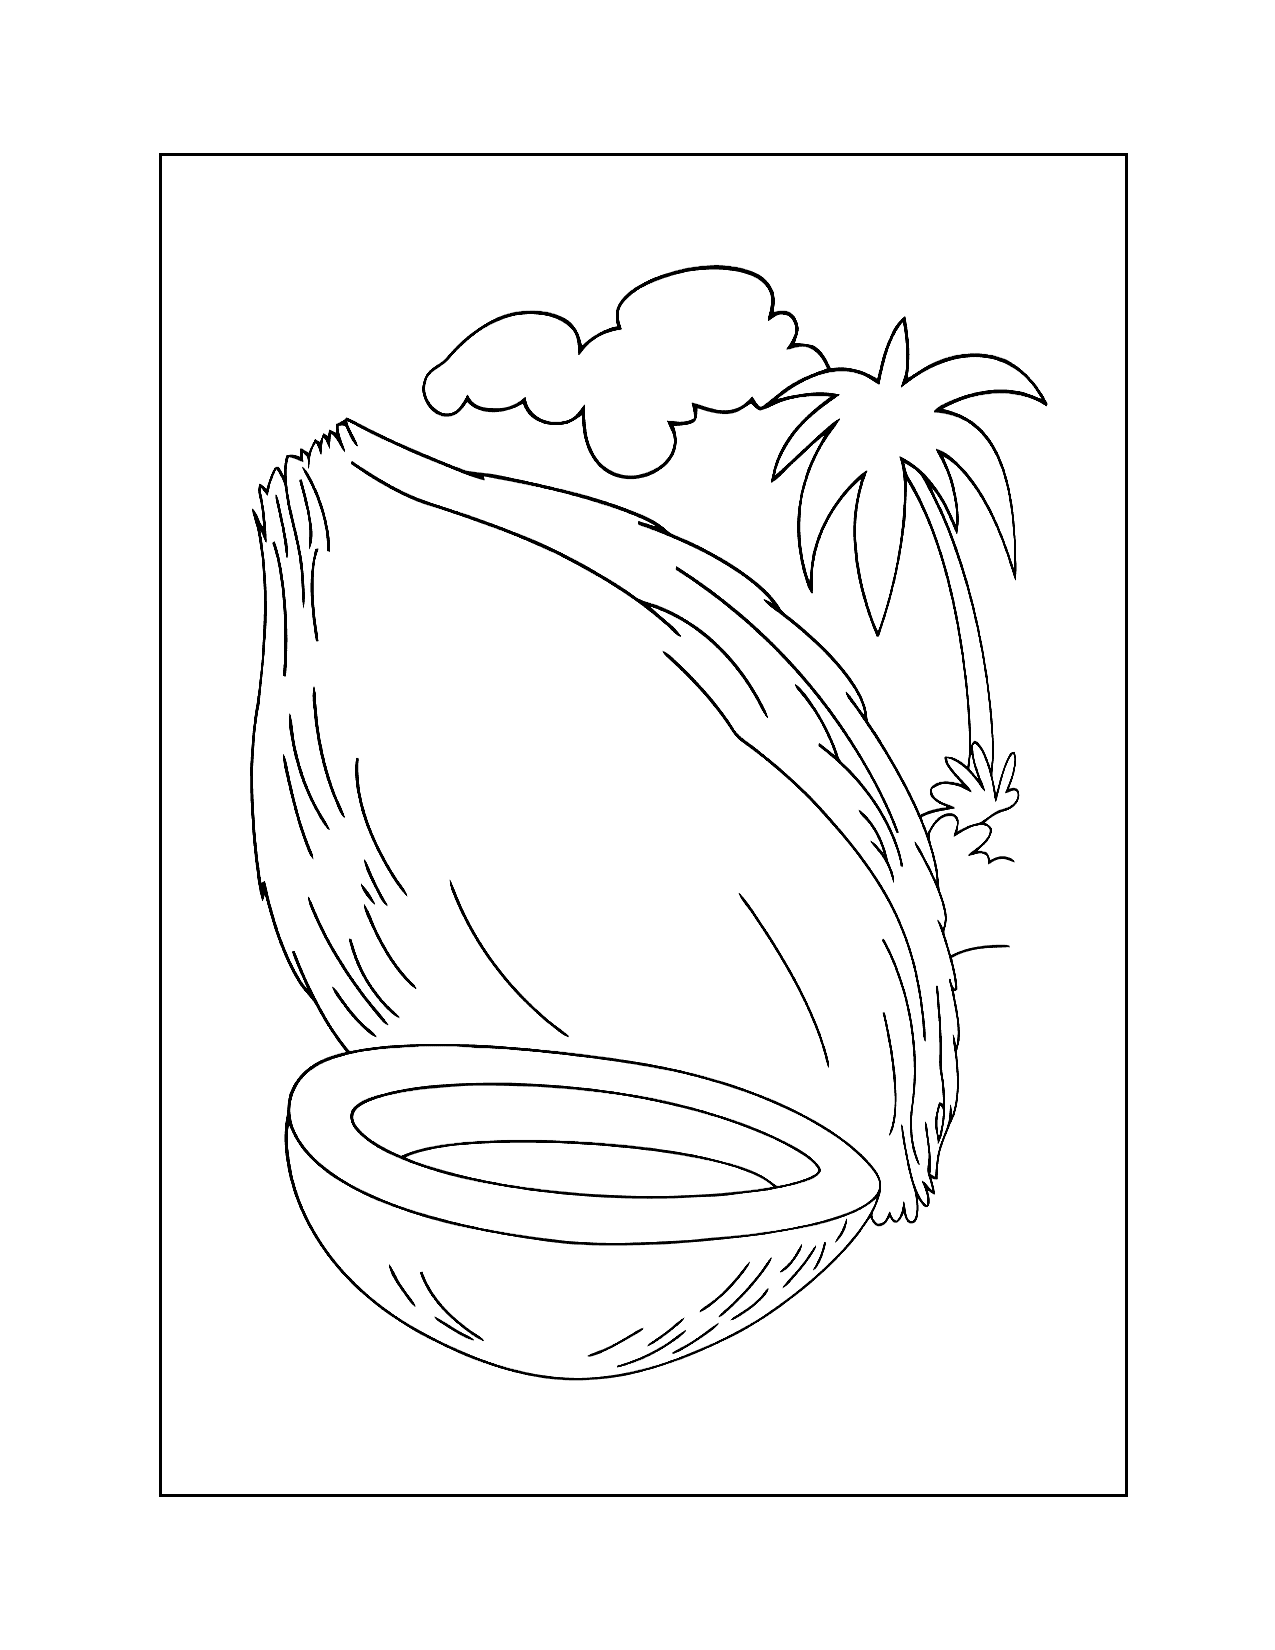 Coconut And Tree Coloring Page